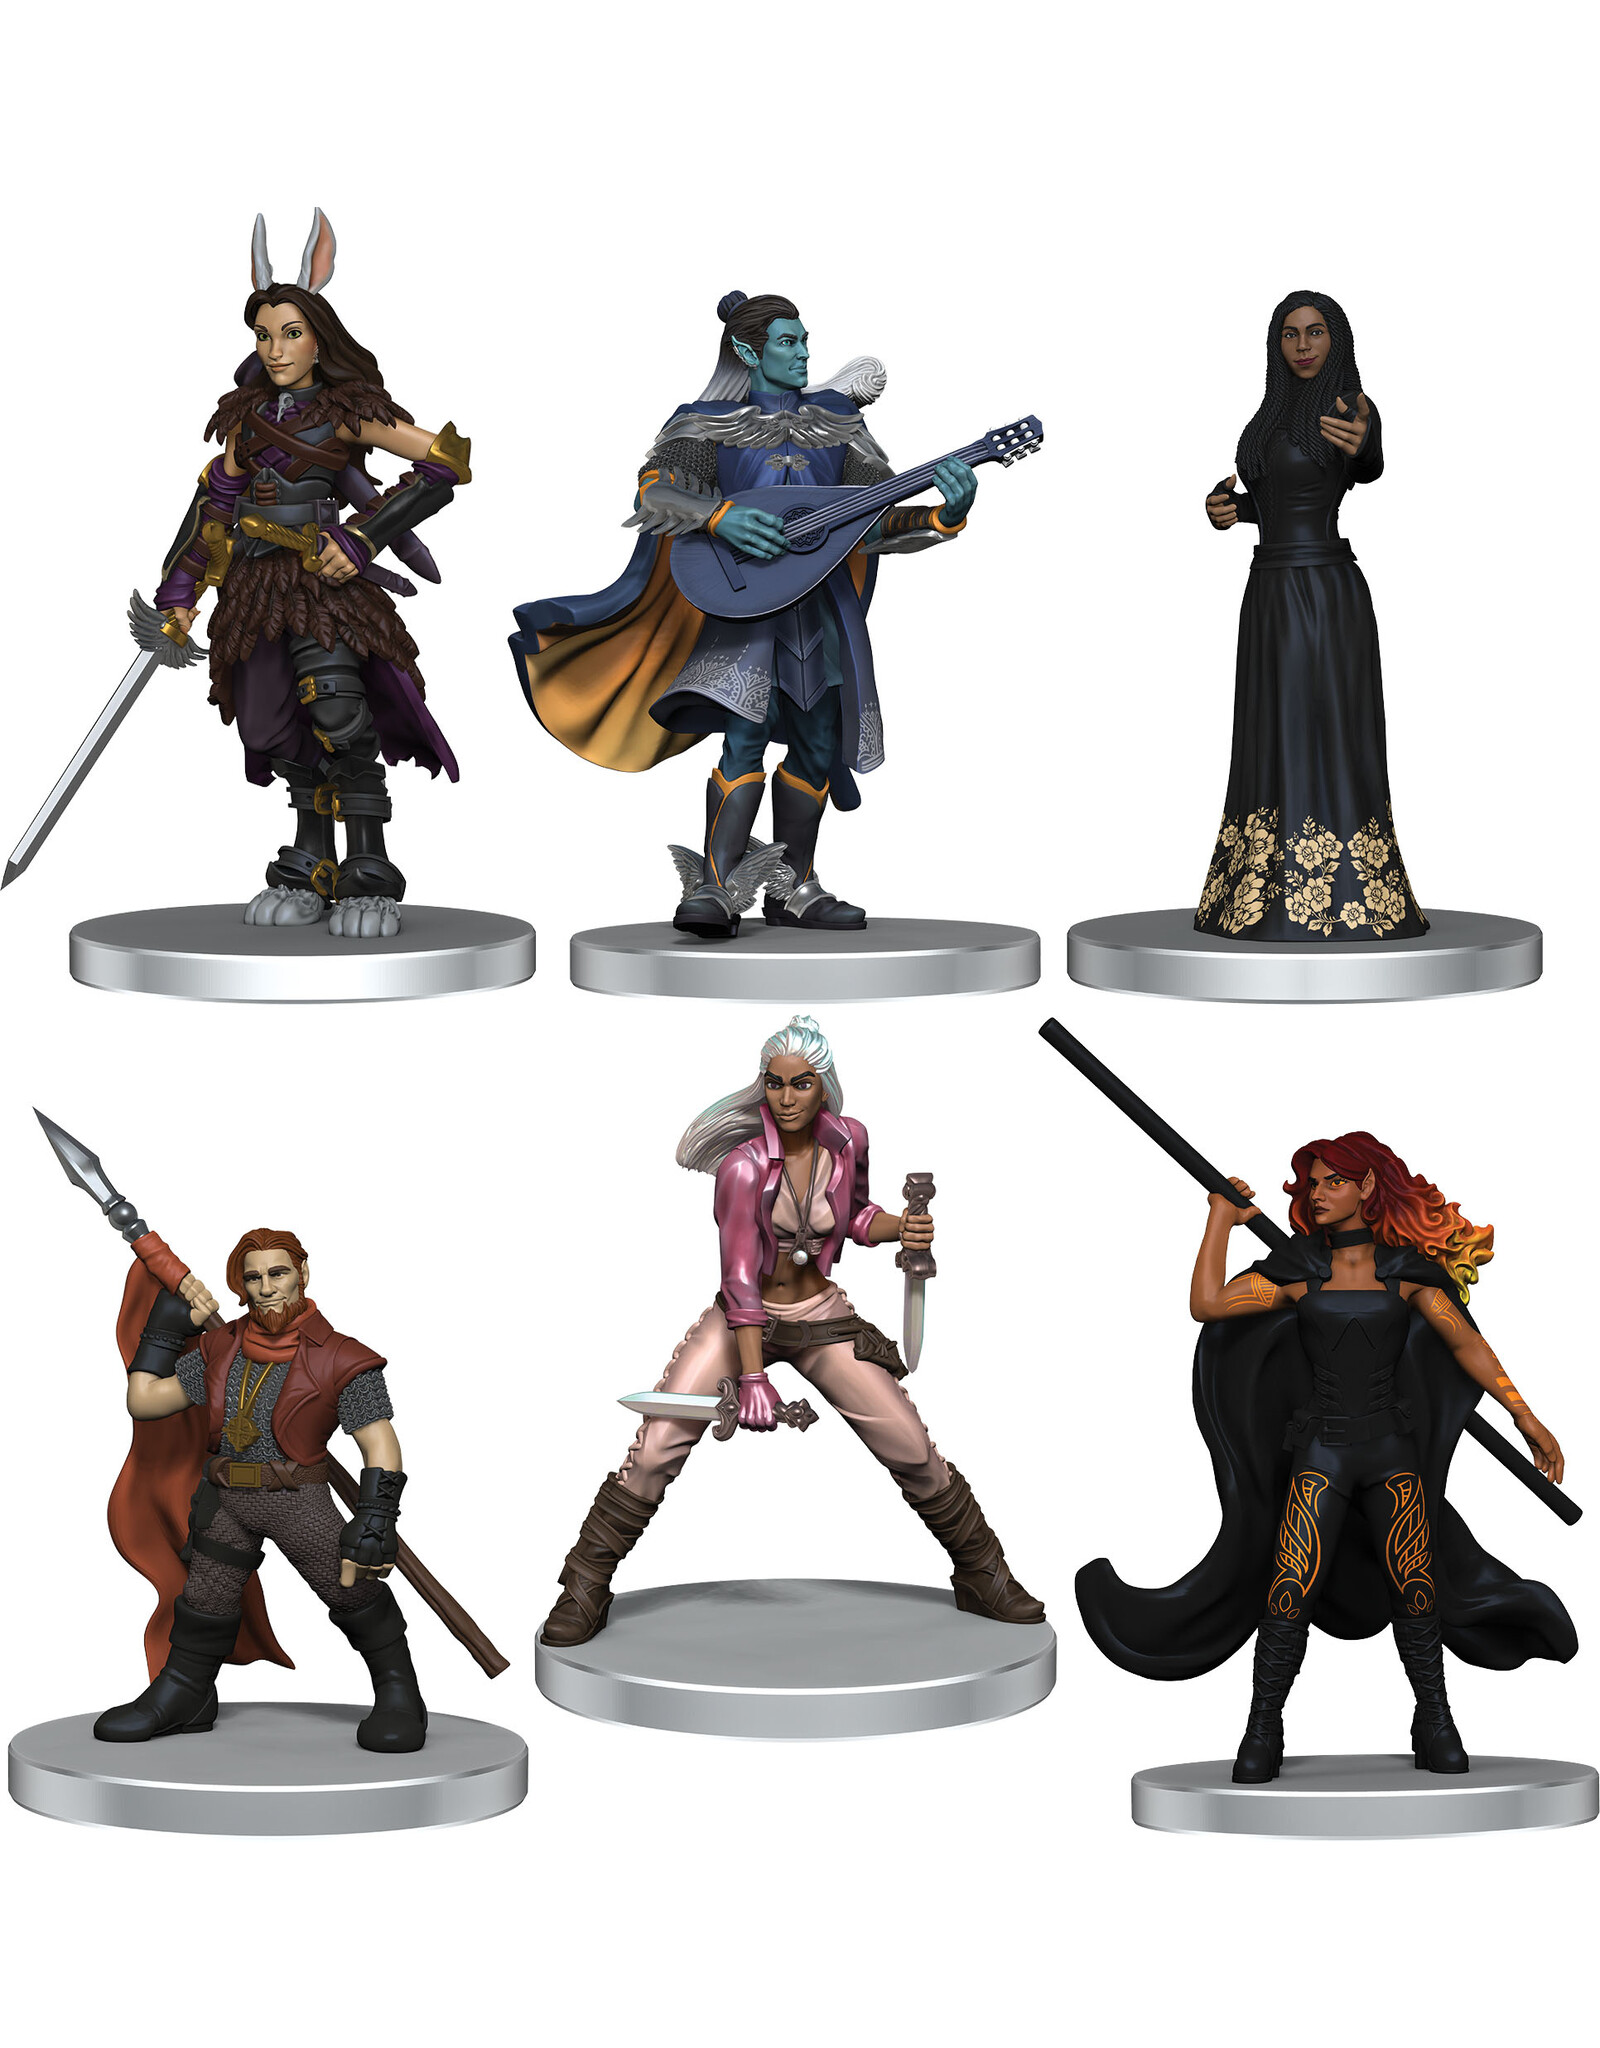 WizKids Critical Role: Exandria Unlimited - The Crown Keepers Boxed Set